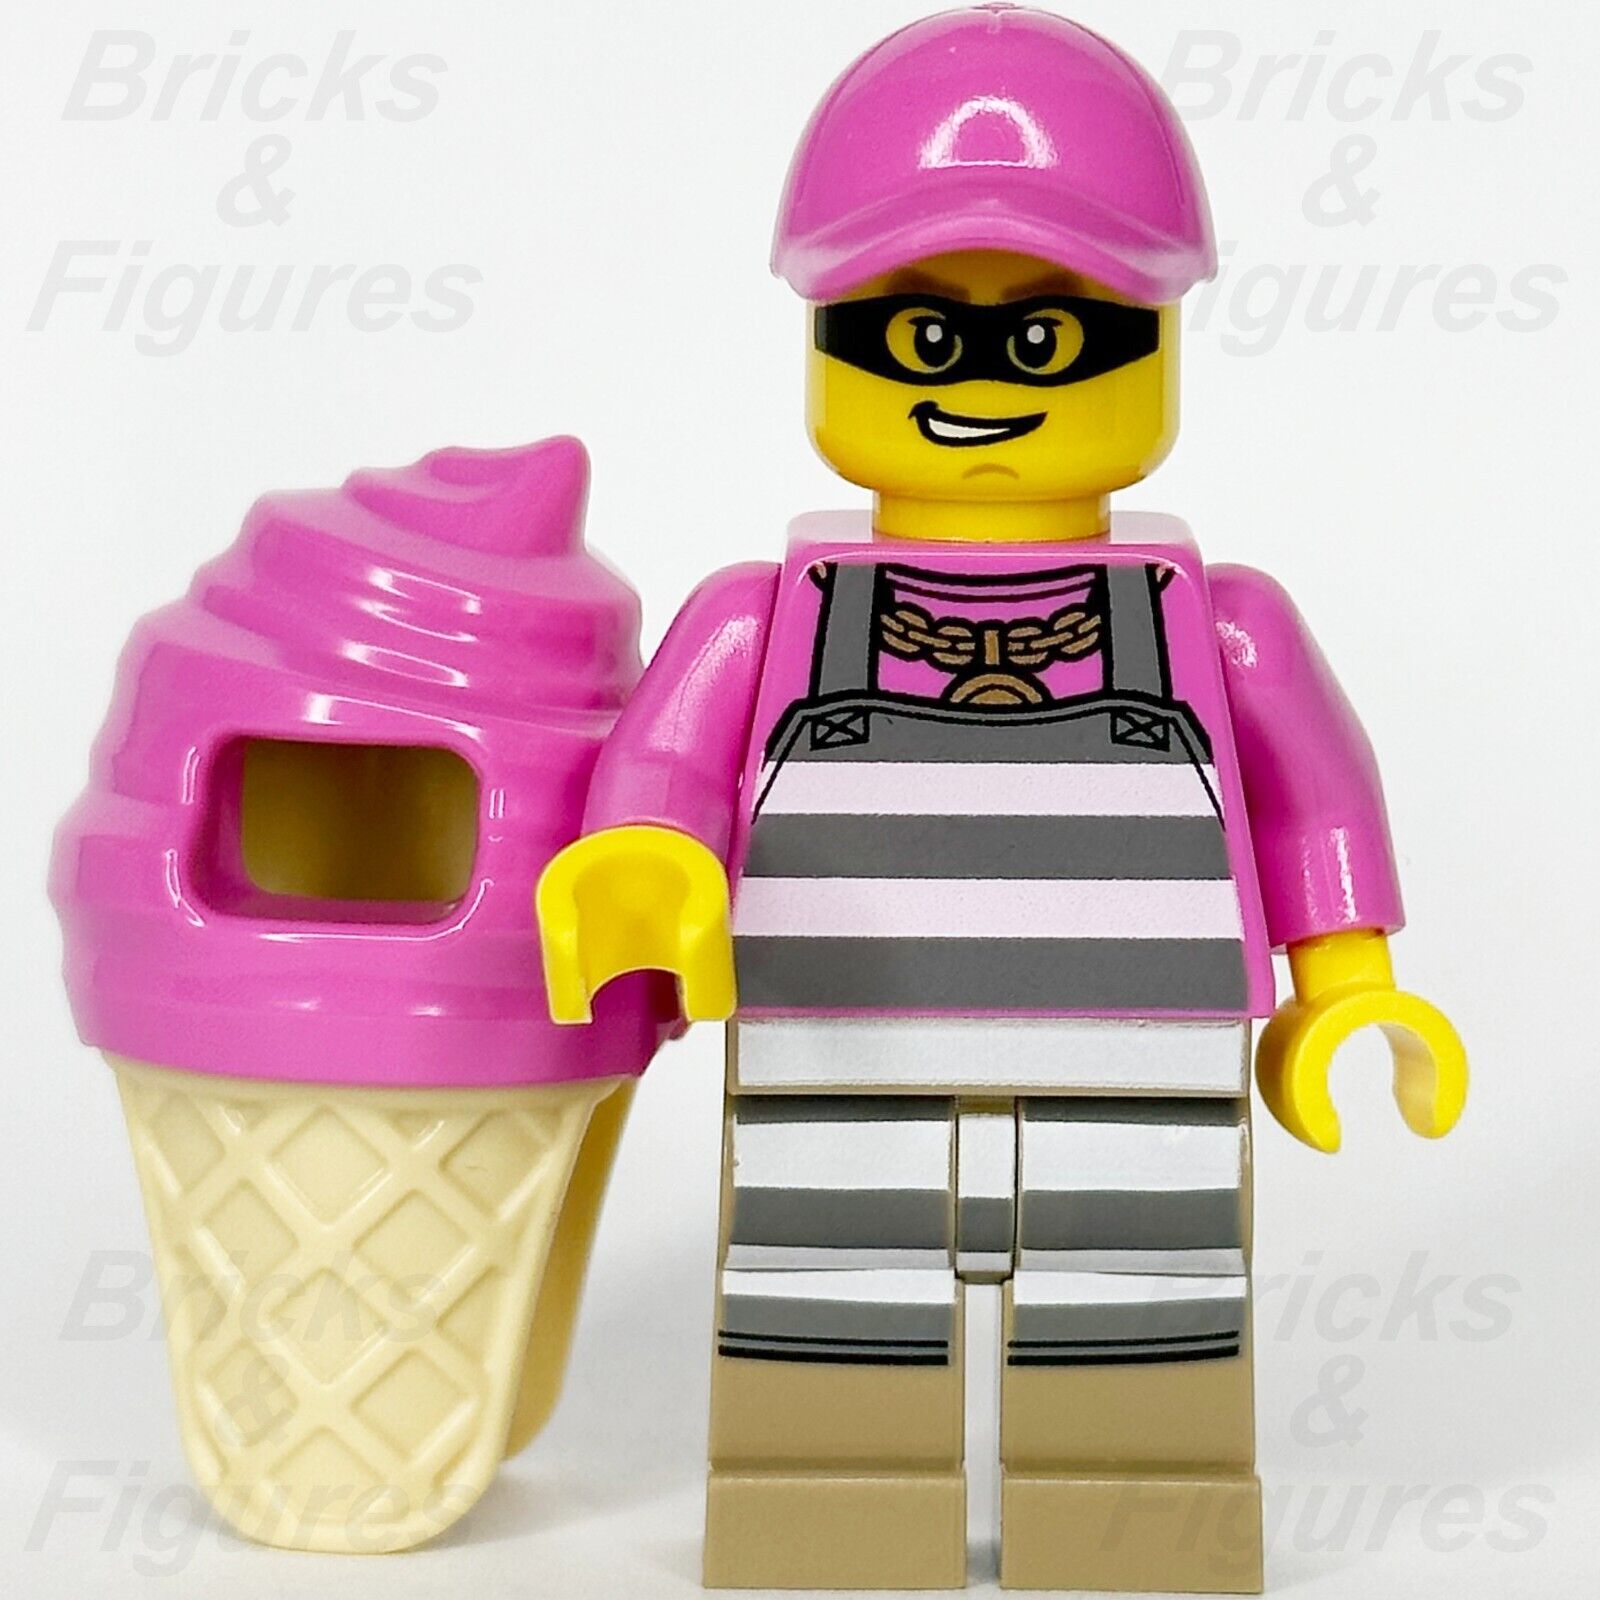 LEGO City Police Crook Cream Minifigure w/ Pink Ice Cream Outfit 60314 cty1385 2